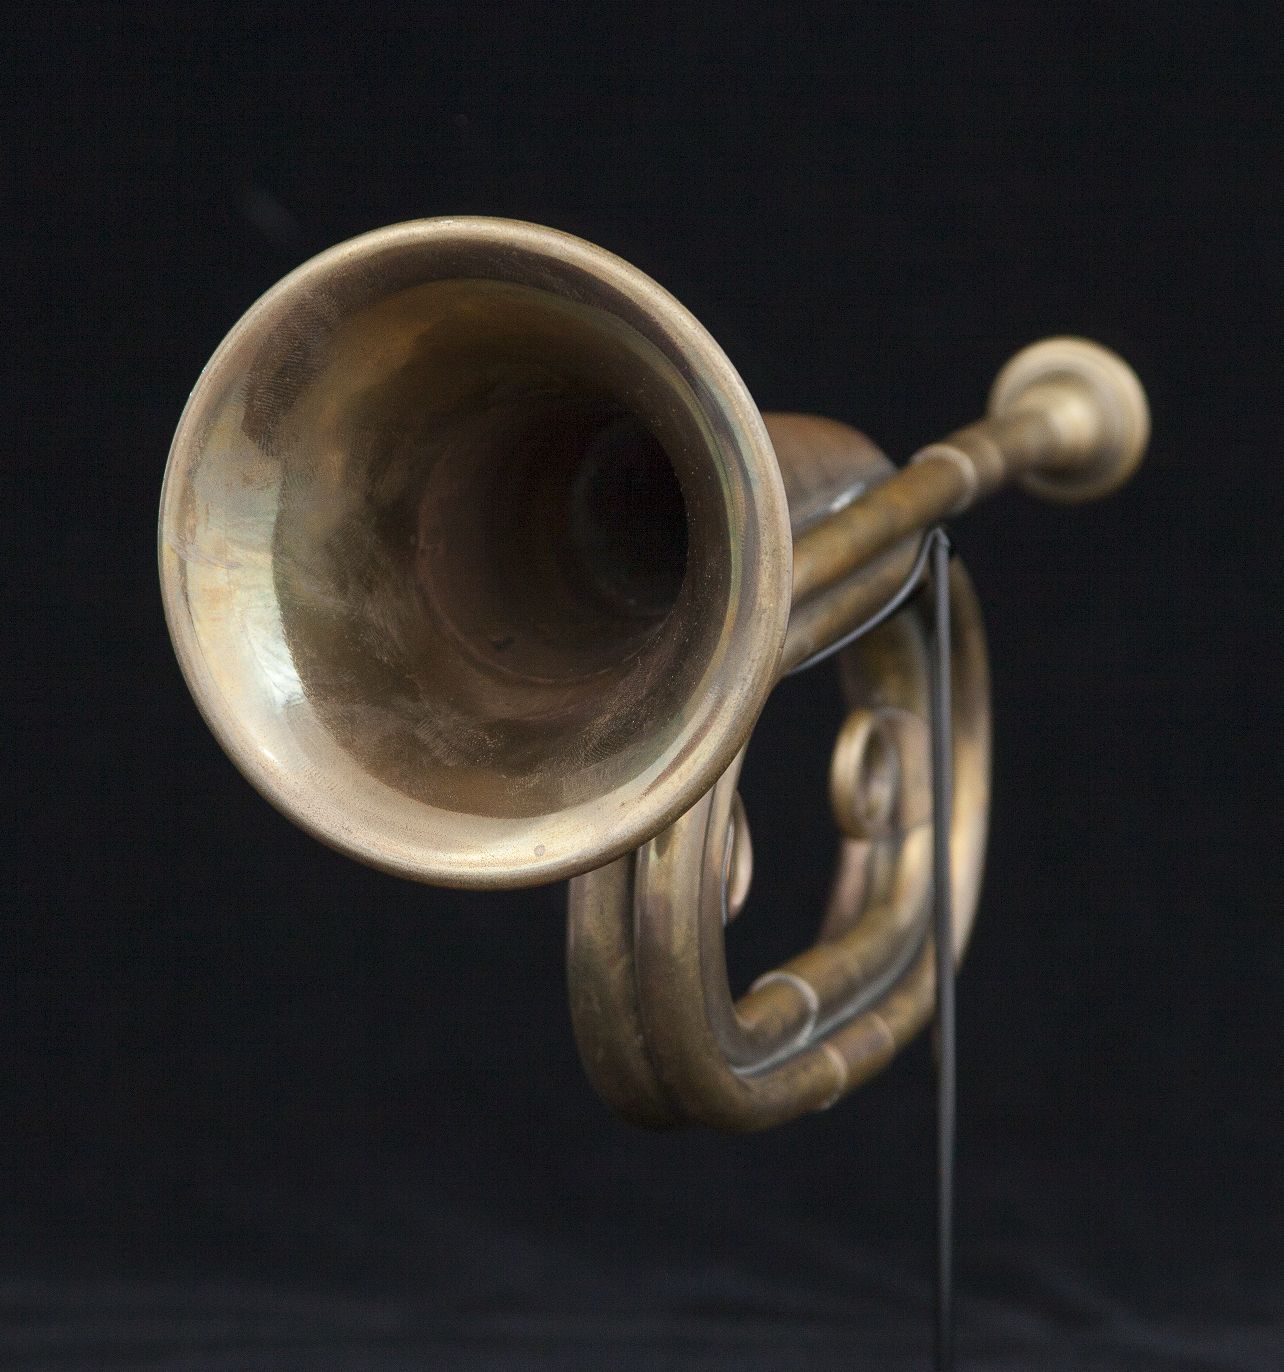 Frontal view of bugle against black background.